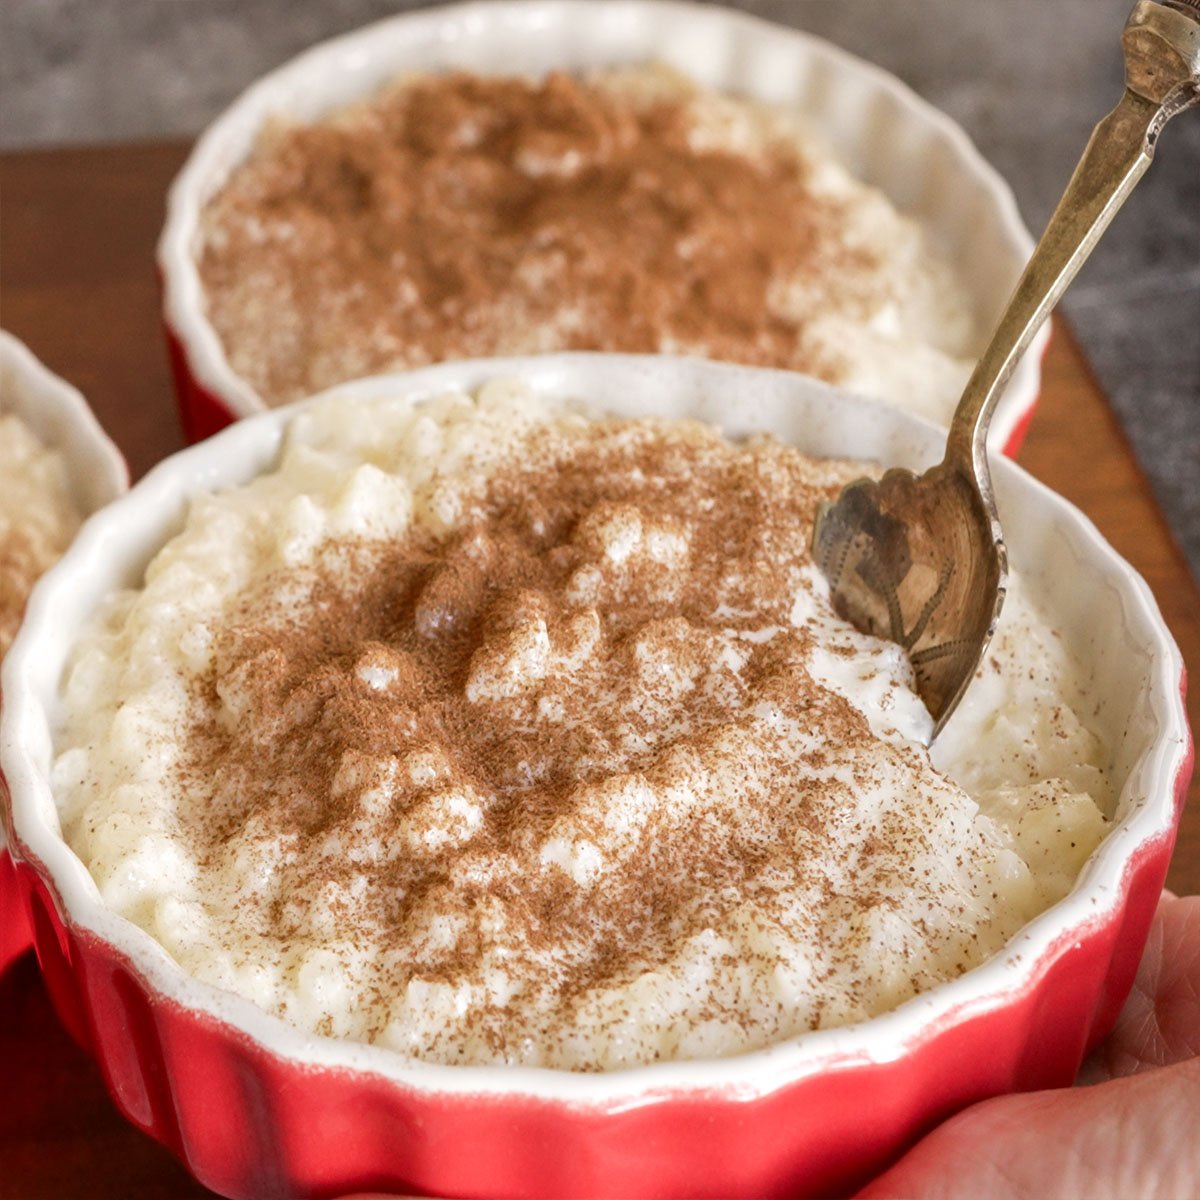 https://vargasavourrecipes.com/wp-content/uploads/2023/12/Image-of-Arroz-con-leche-in-a-bowl-with-spoon-7.jpg